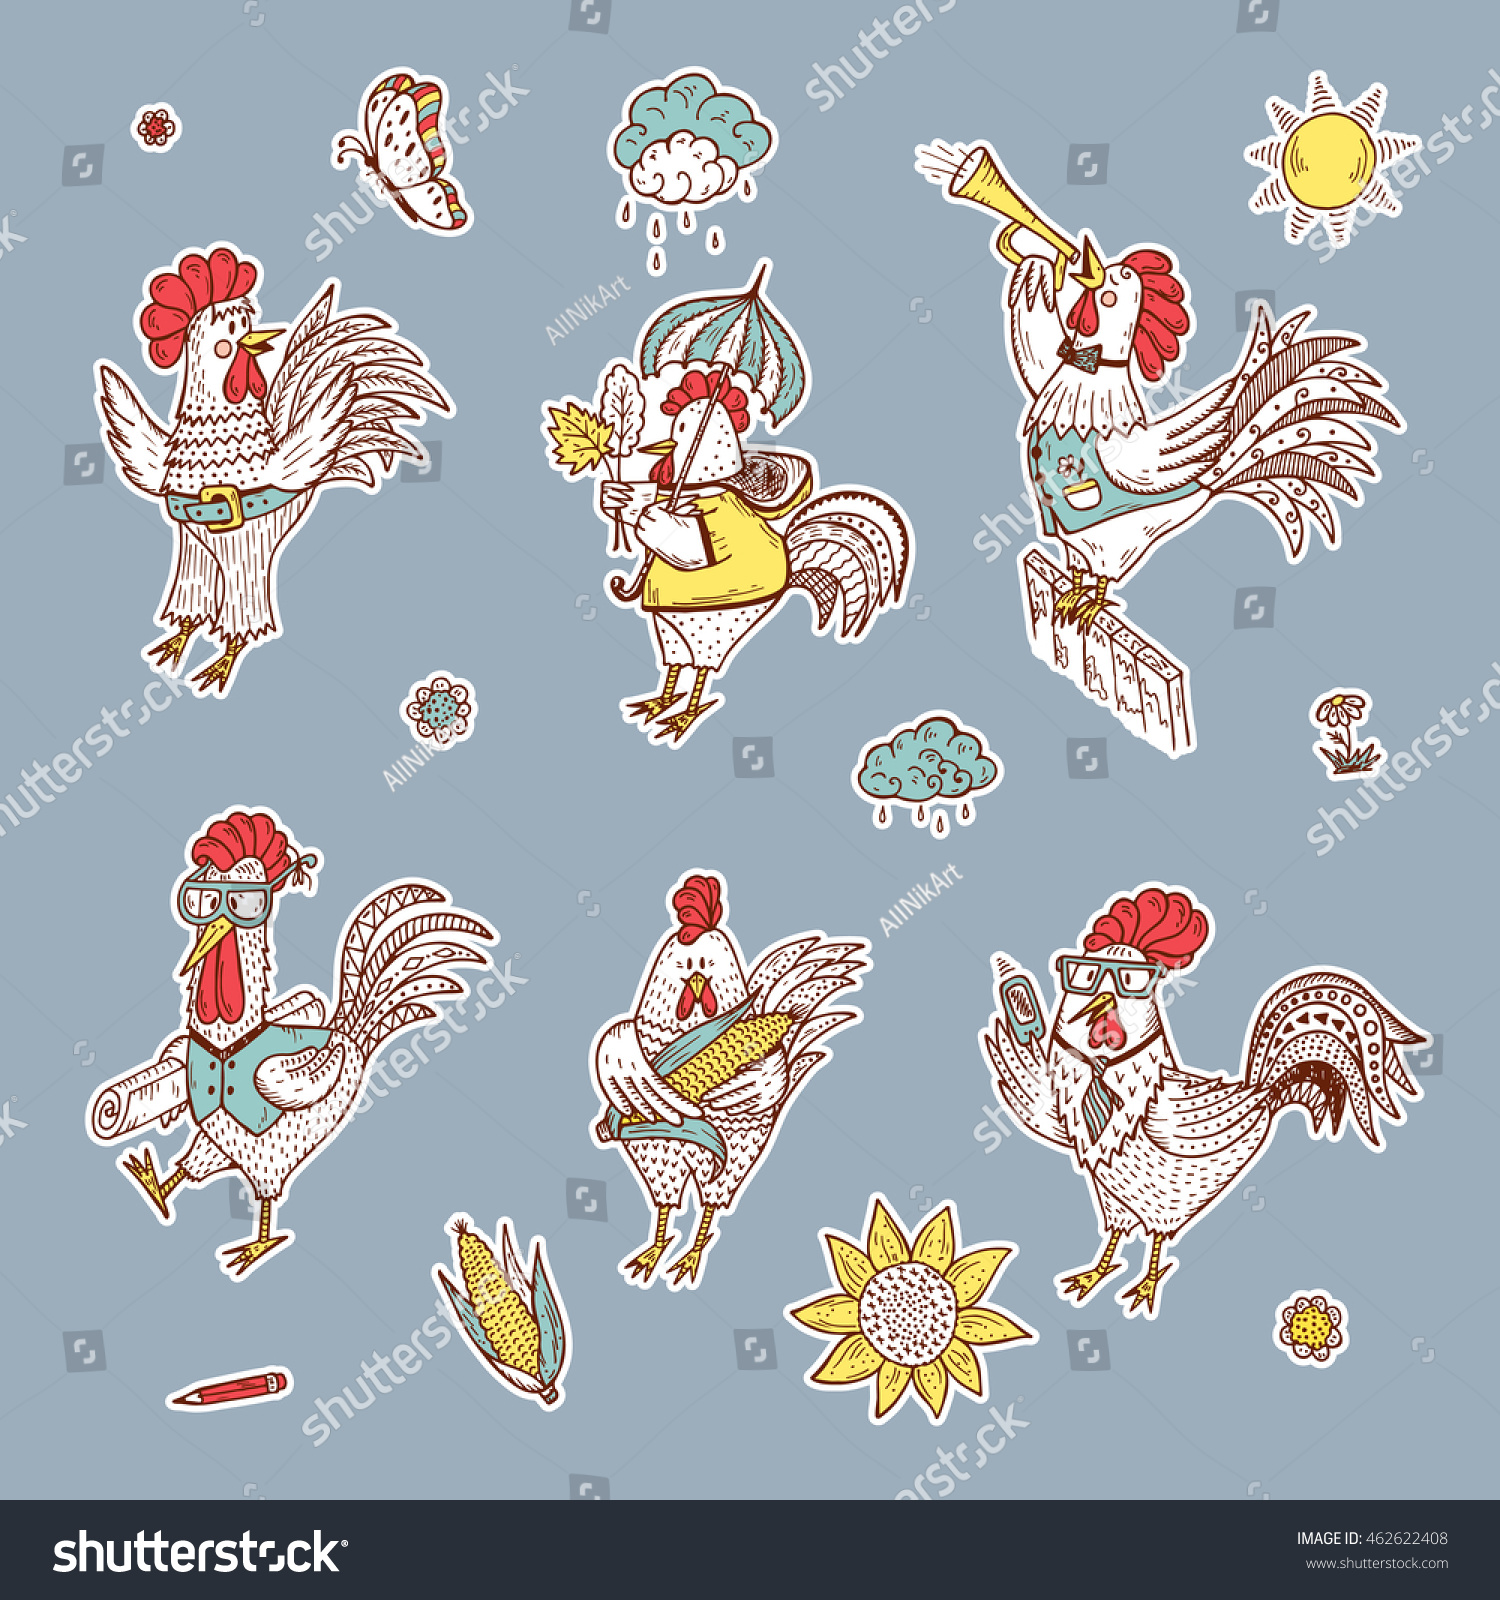 SVG of Different Cute Roosters Stickers Vector Set. Hand Drawn Doodle Cocks svg